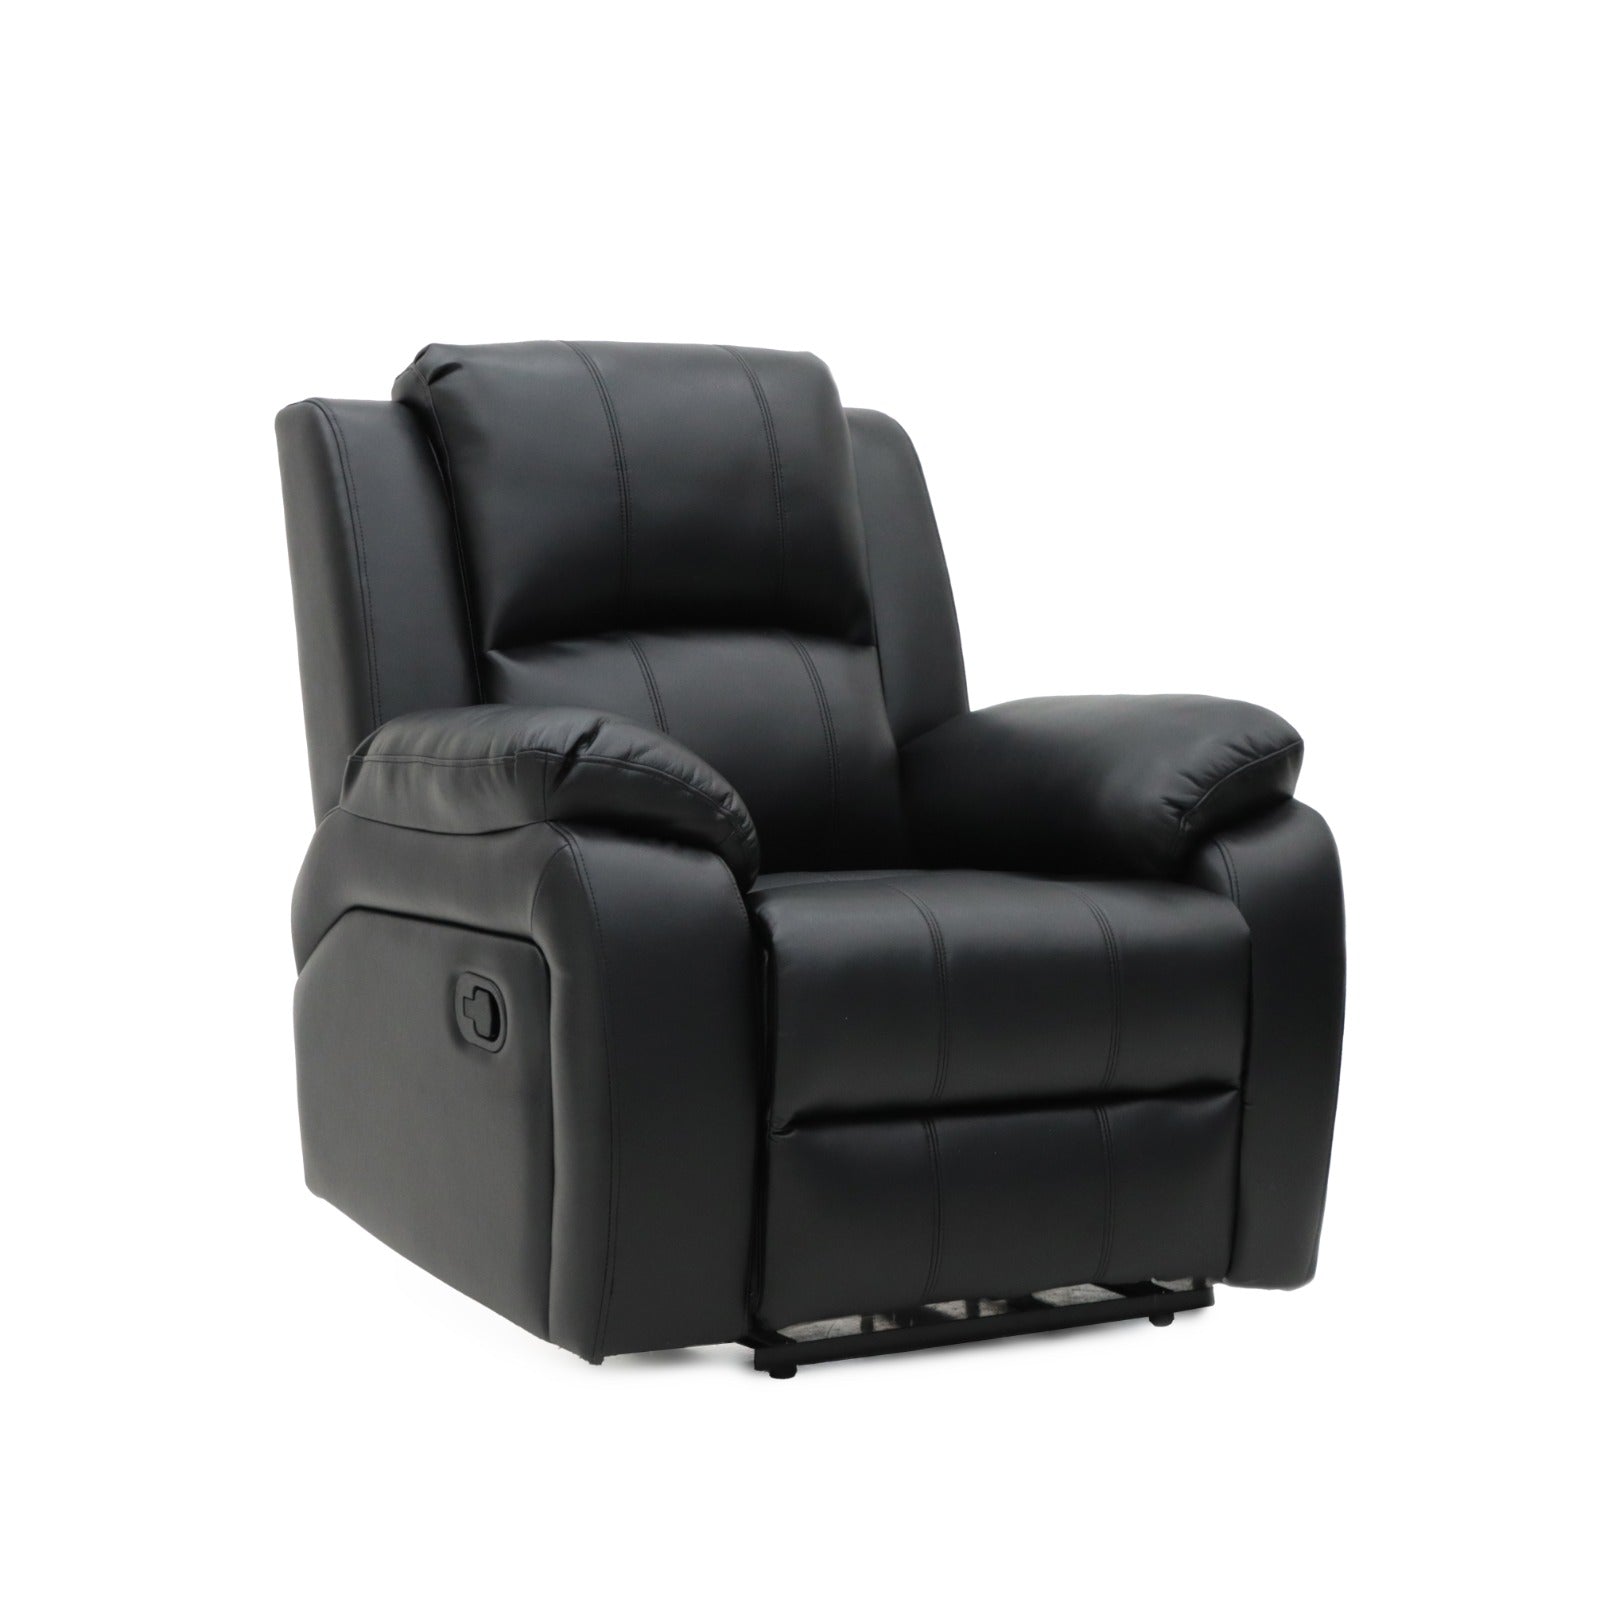 Darwin Power Recliner Chair Black Leather